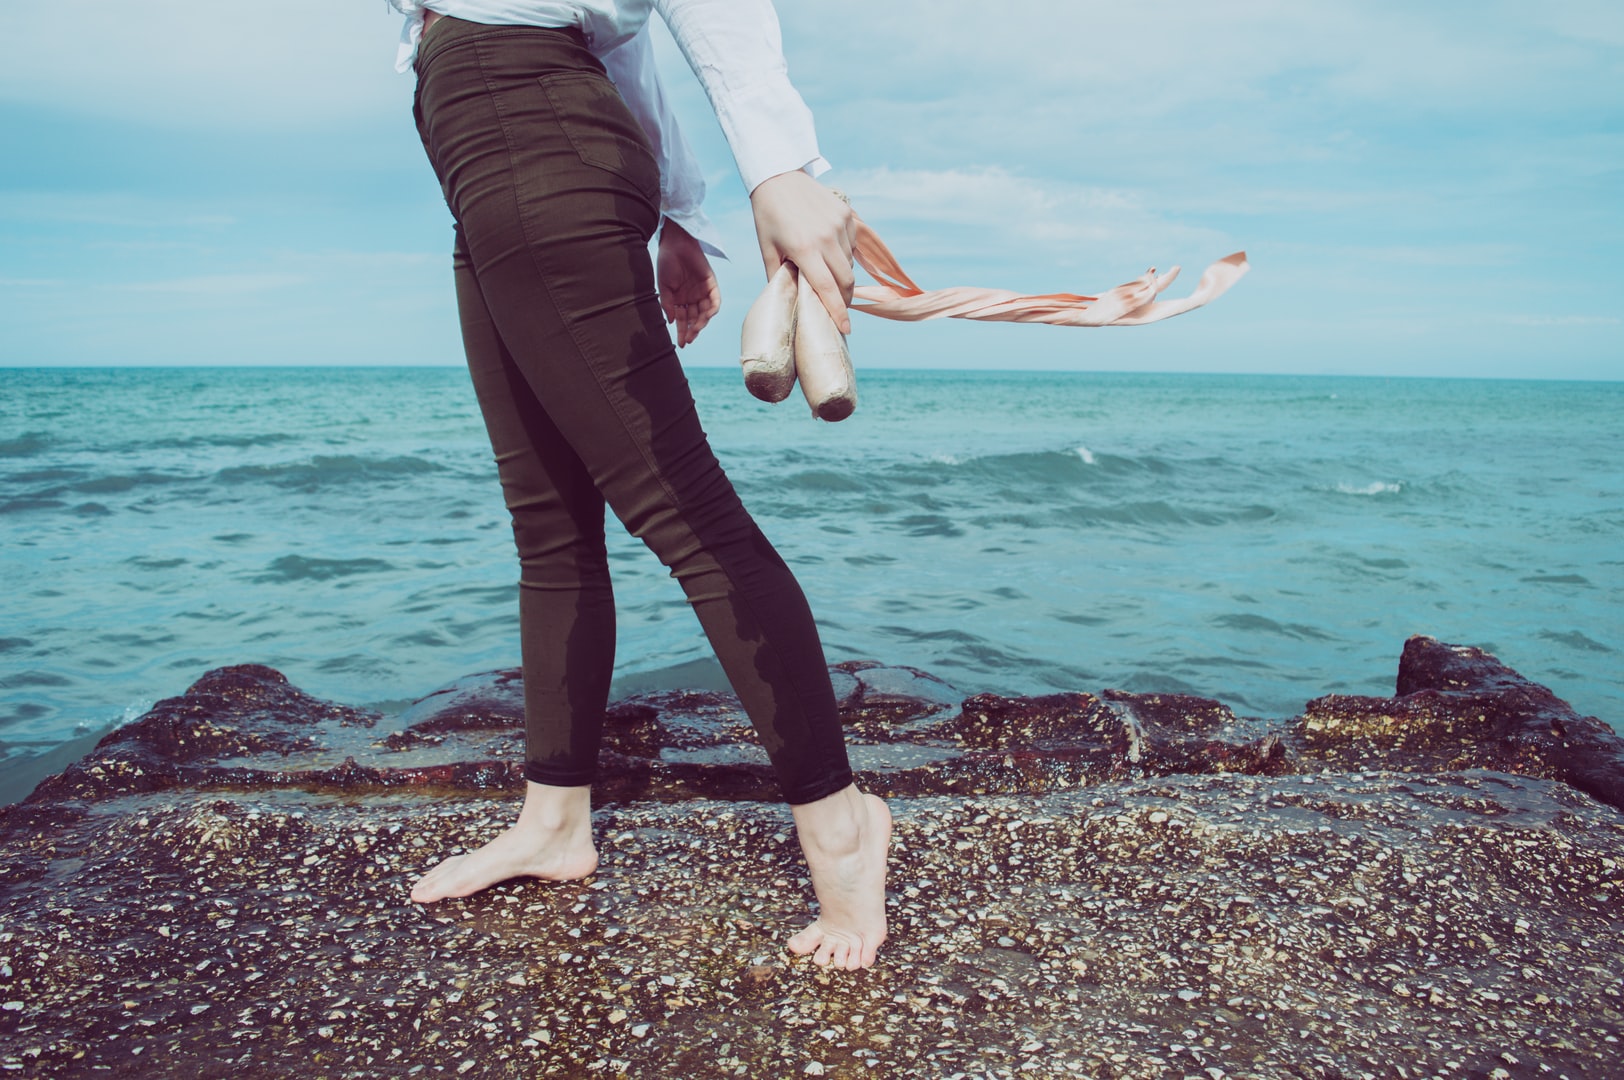 Barefoot woman on beach holds ballet shoes